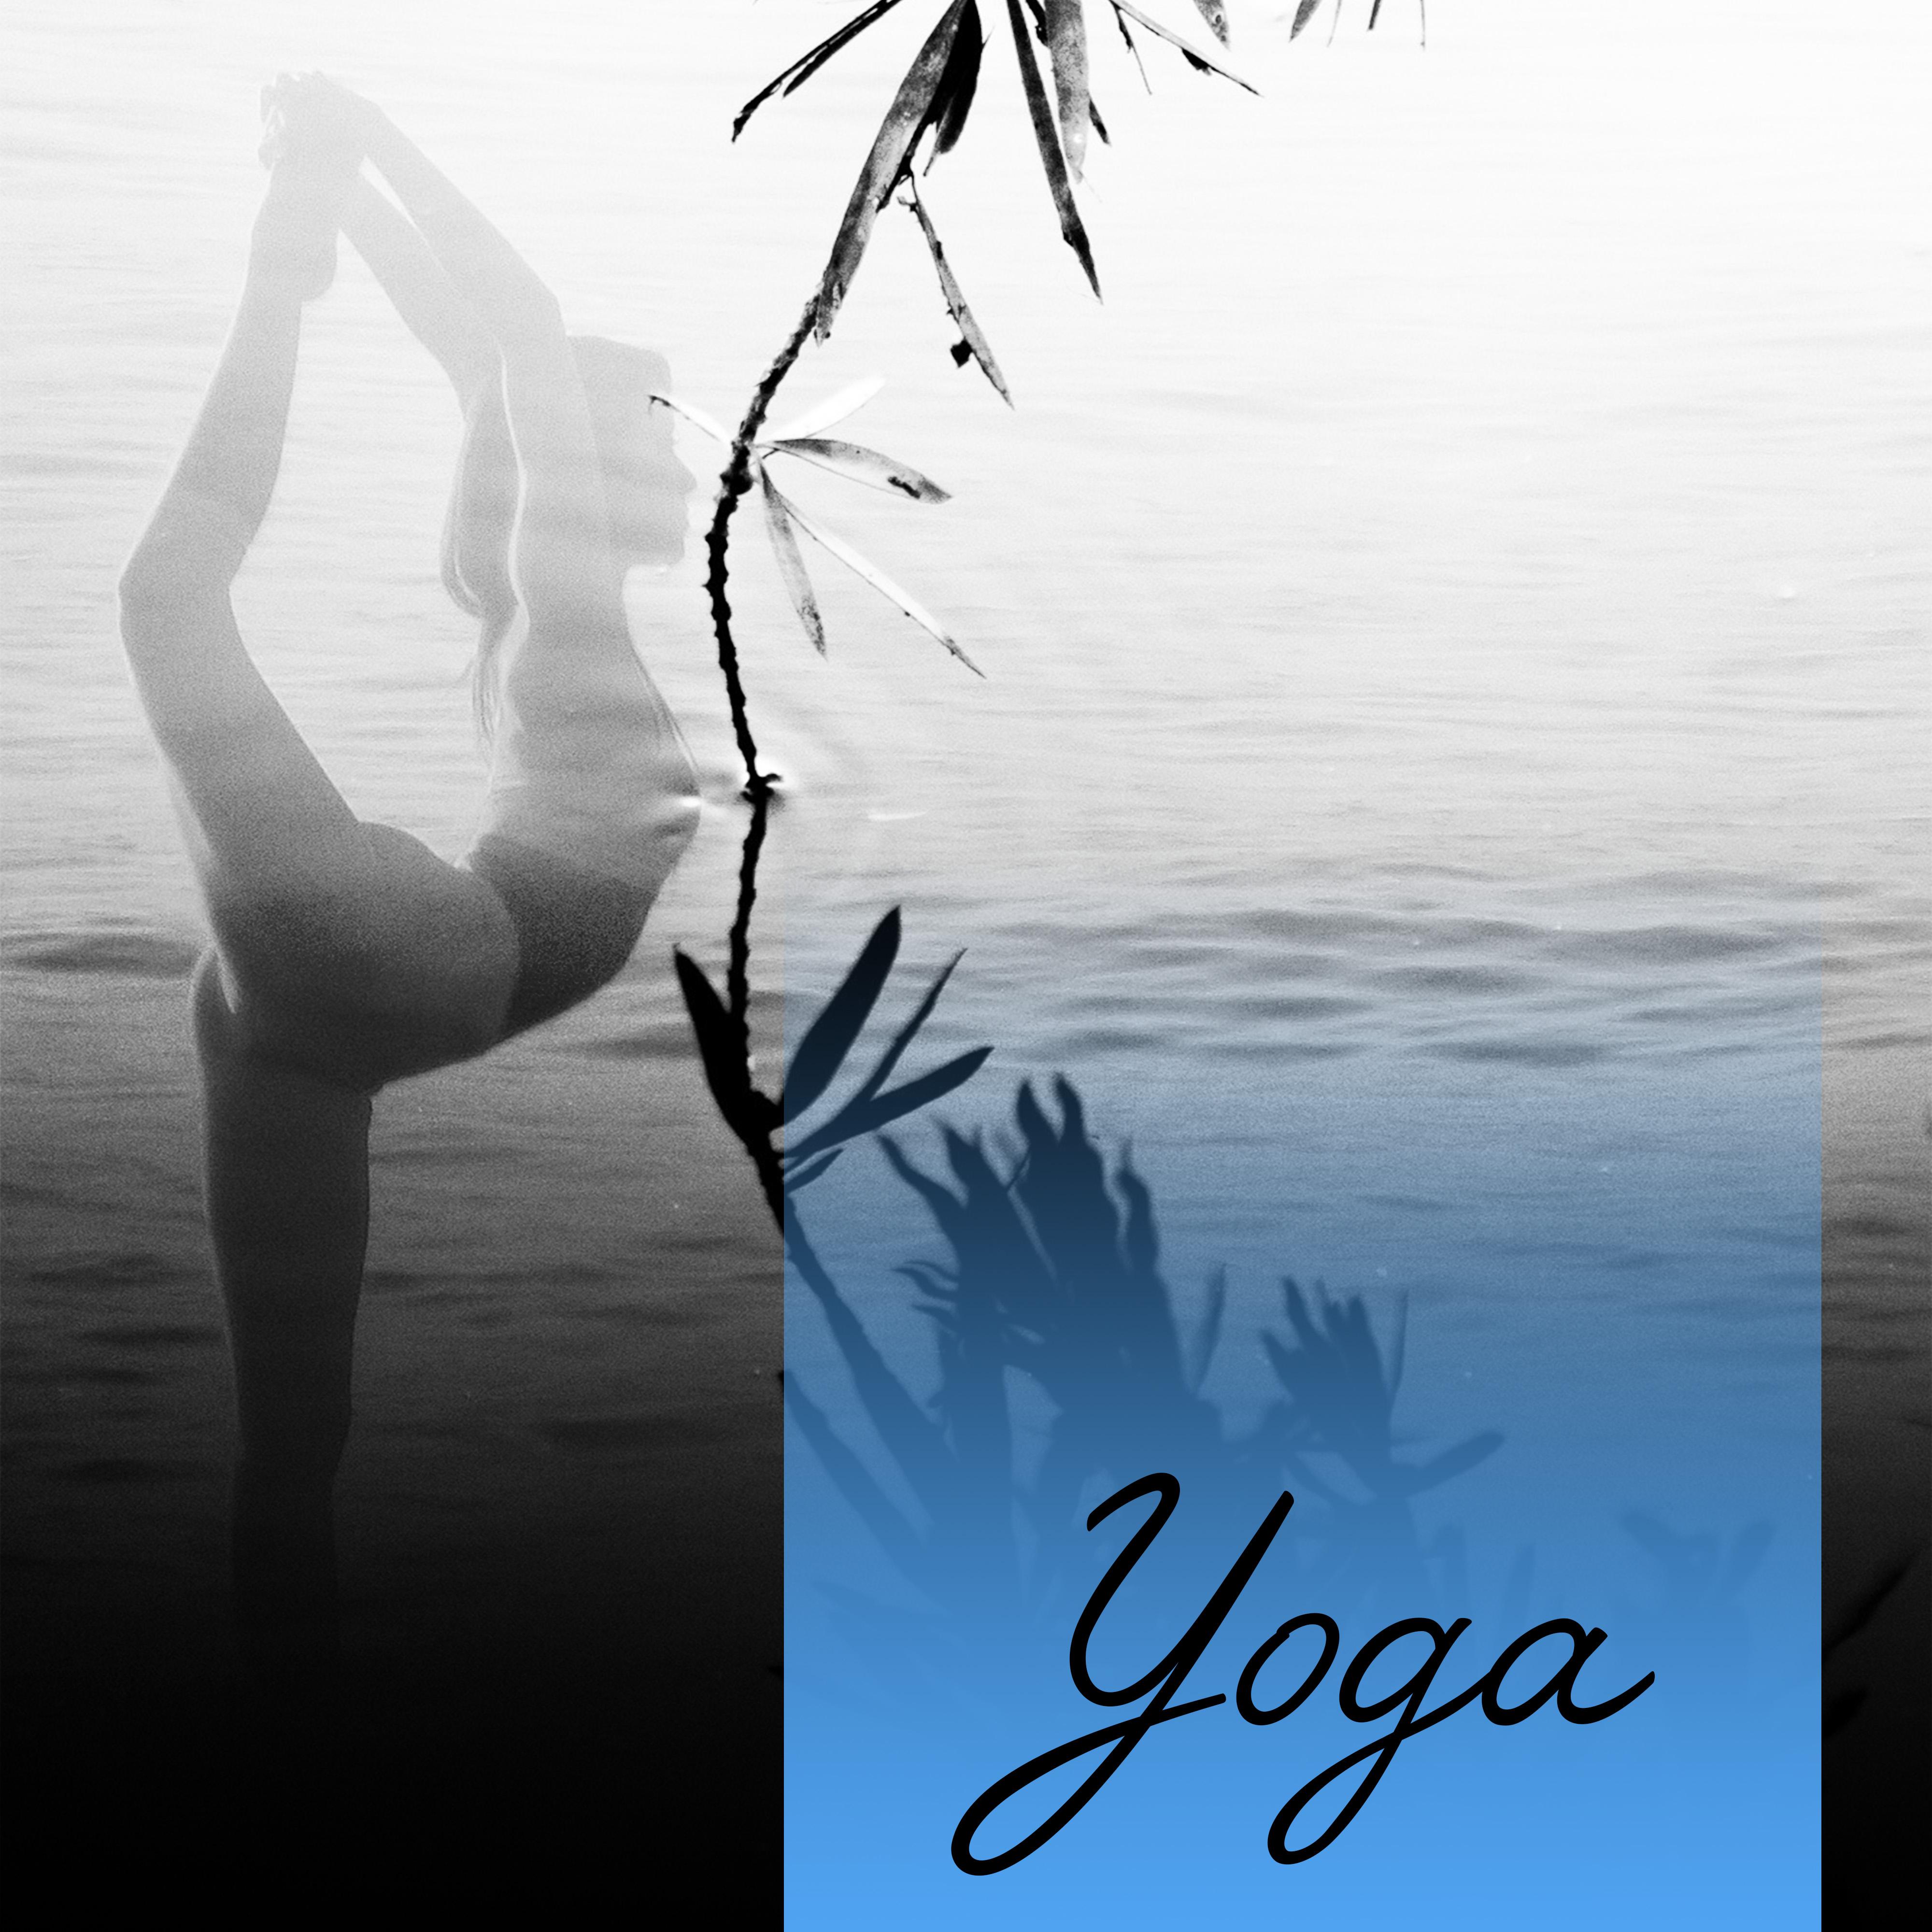 Yoga  Soft Music for Meditation, Train Your Mind, Yoga Healing, Concentration, Harmony, Relaxation, Pure Mind